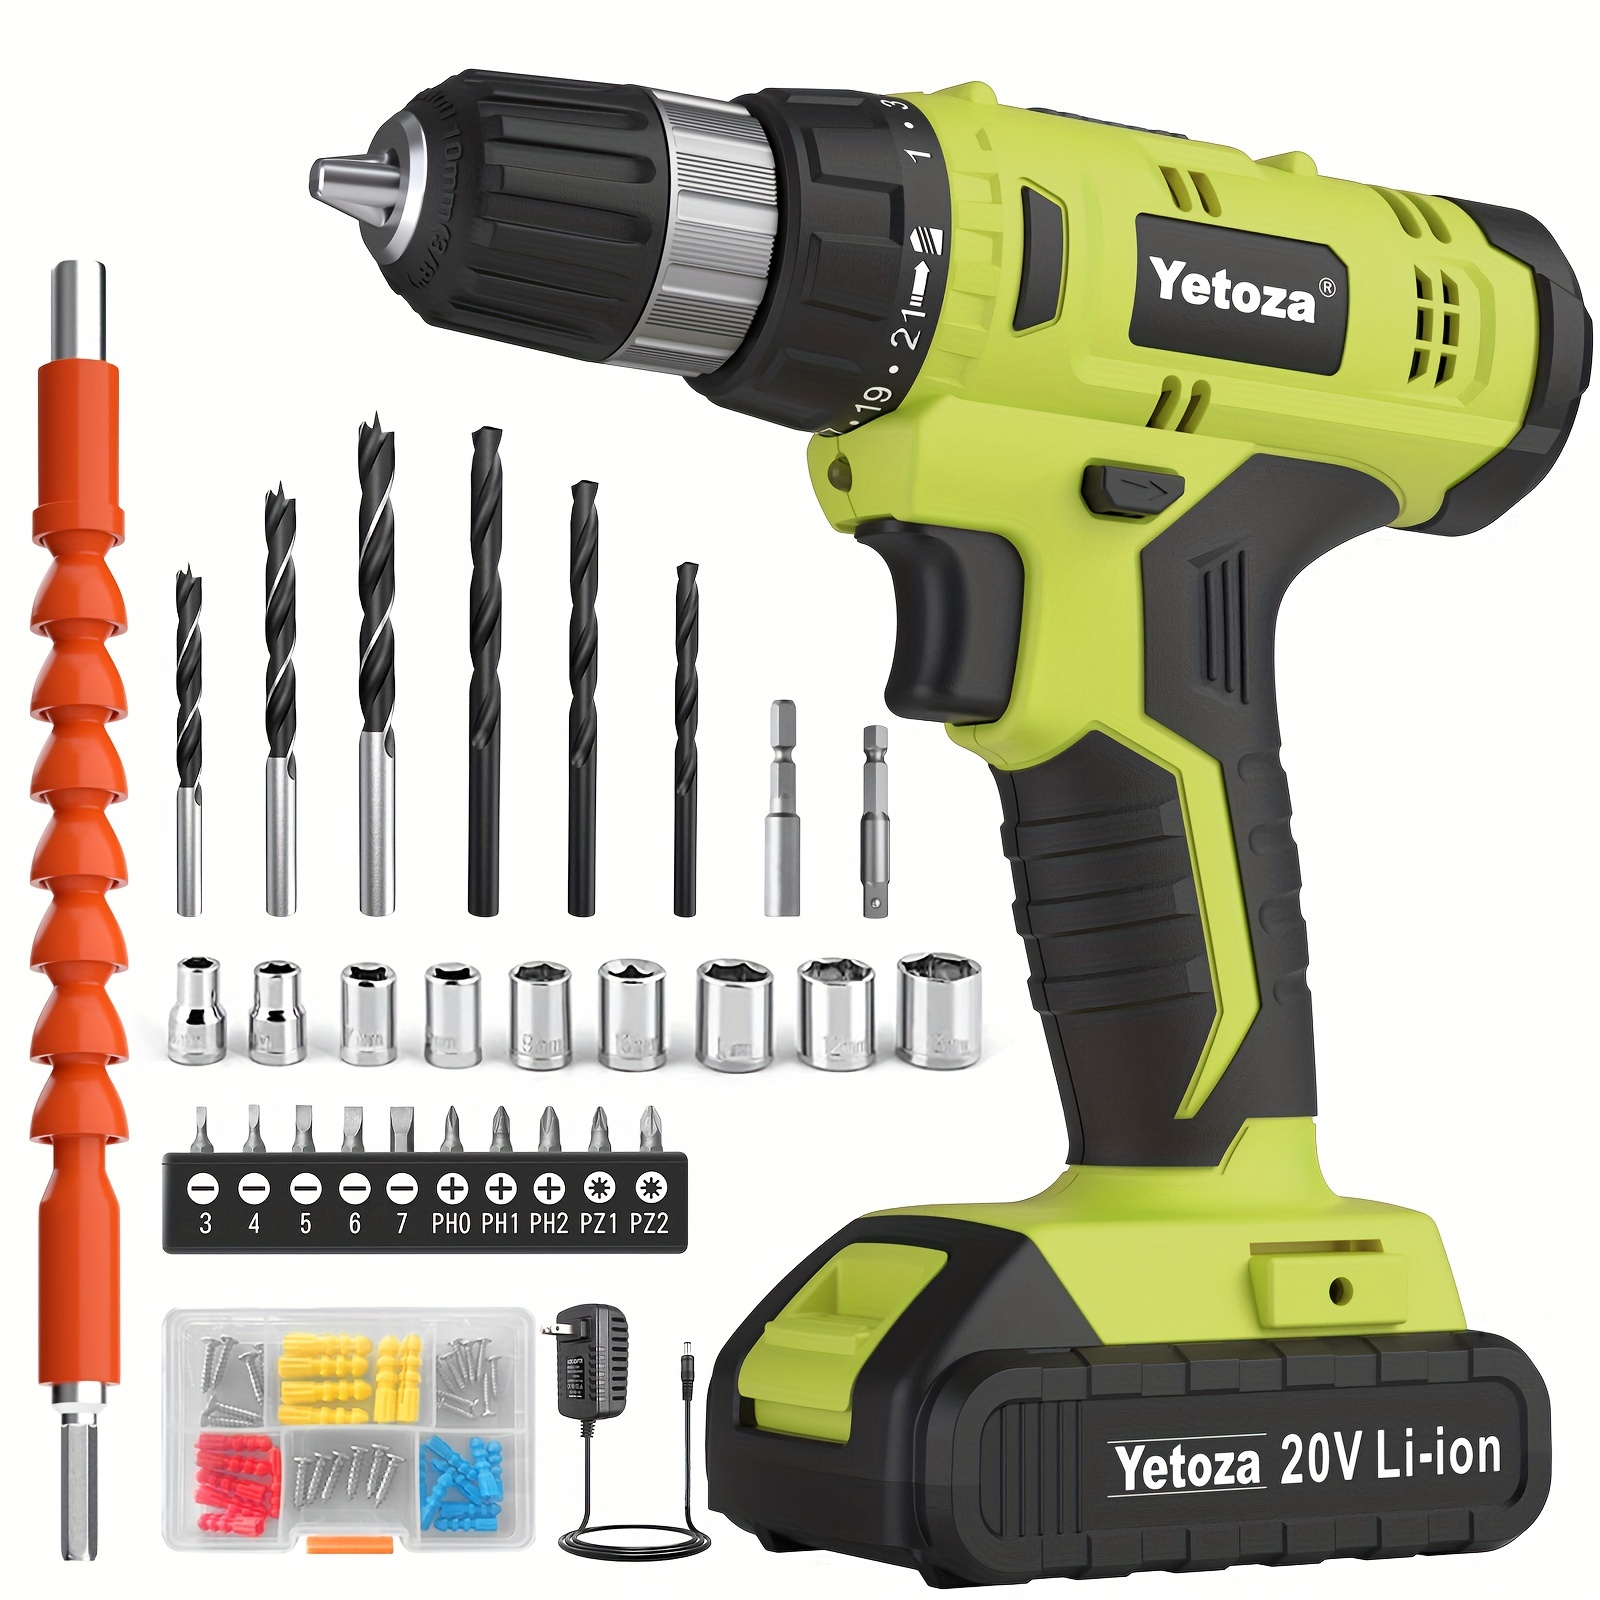 

Cordless Drill Set, 20v Electric Power Drill With Battery And Charger, Torque 30n, 21+1 Torque Setting, 3/8-inch Keyless Chuck, Drill Driver Bits Kit, With Led Electric Drill Set. (green)